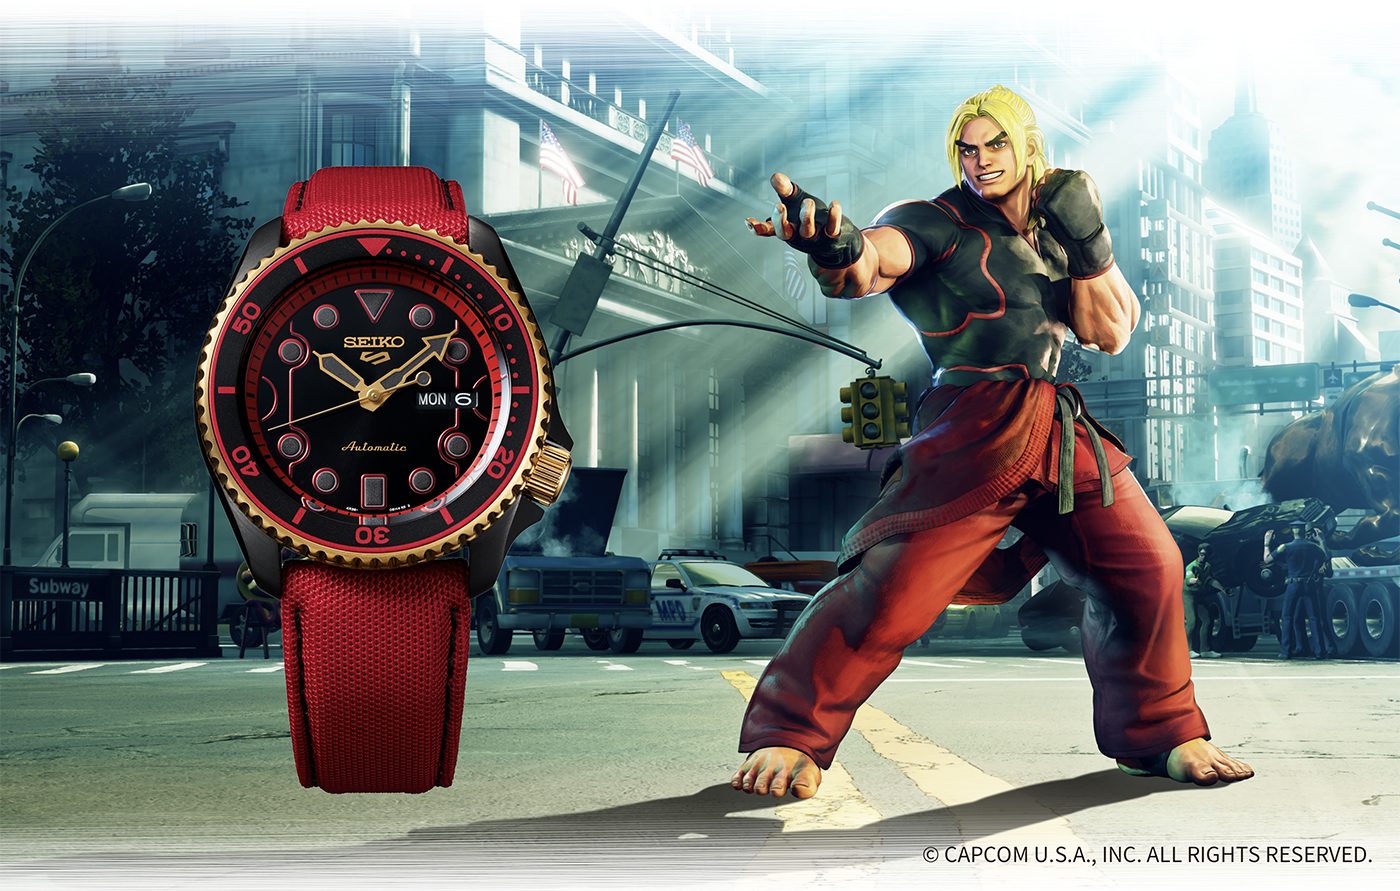 Seiko Partners With “Street Fighter” Series For Six Limited-Edition Seiko 5  Models | aBlogtoWatch